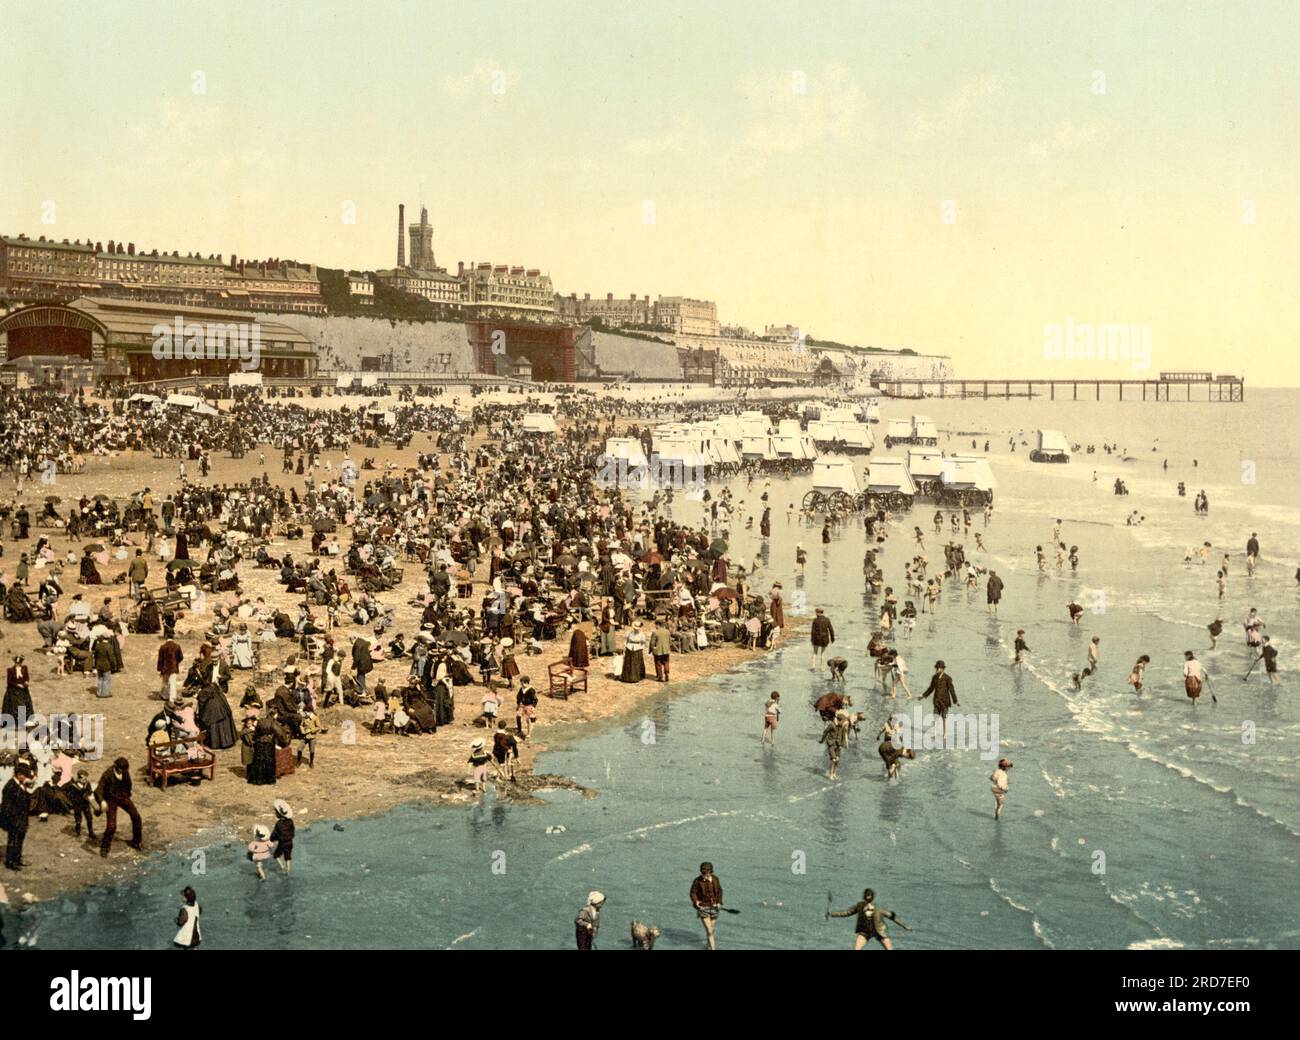 Sands, Ramsgate, a seaside town in the district of Thanet in east Kent, England, 1895, Historical, digital improved reproduction of an old Photochrome print Stock Photo